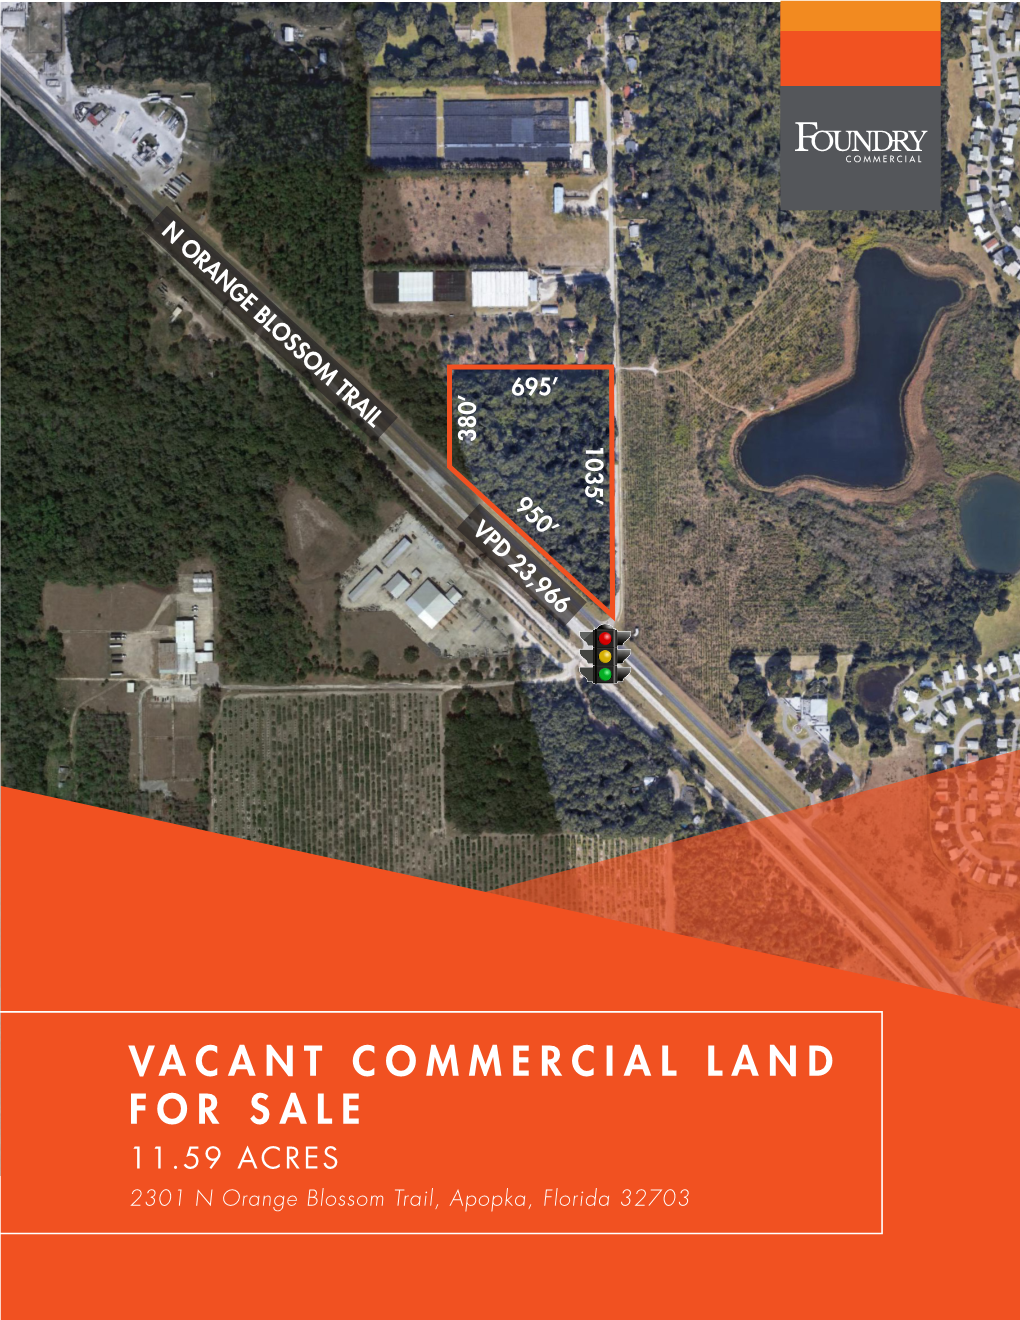 VACANT COMMERCIAL LAND for SALE 11.59 ACRES 2301 N Orange Blossom Trail, Apopka, Florida 32703 PROPERTY HIGHLIGHTS